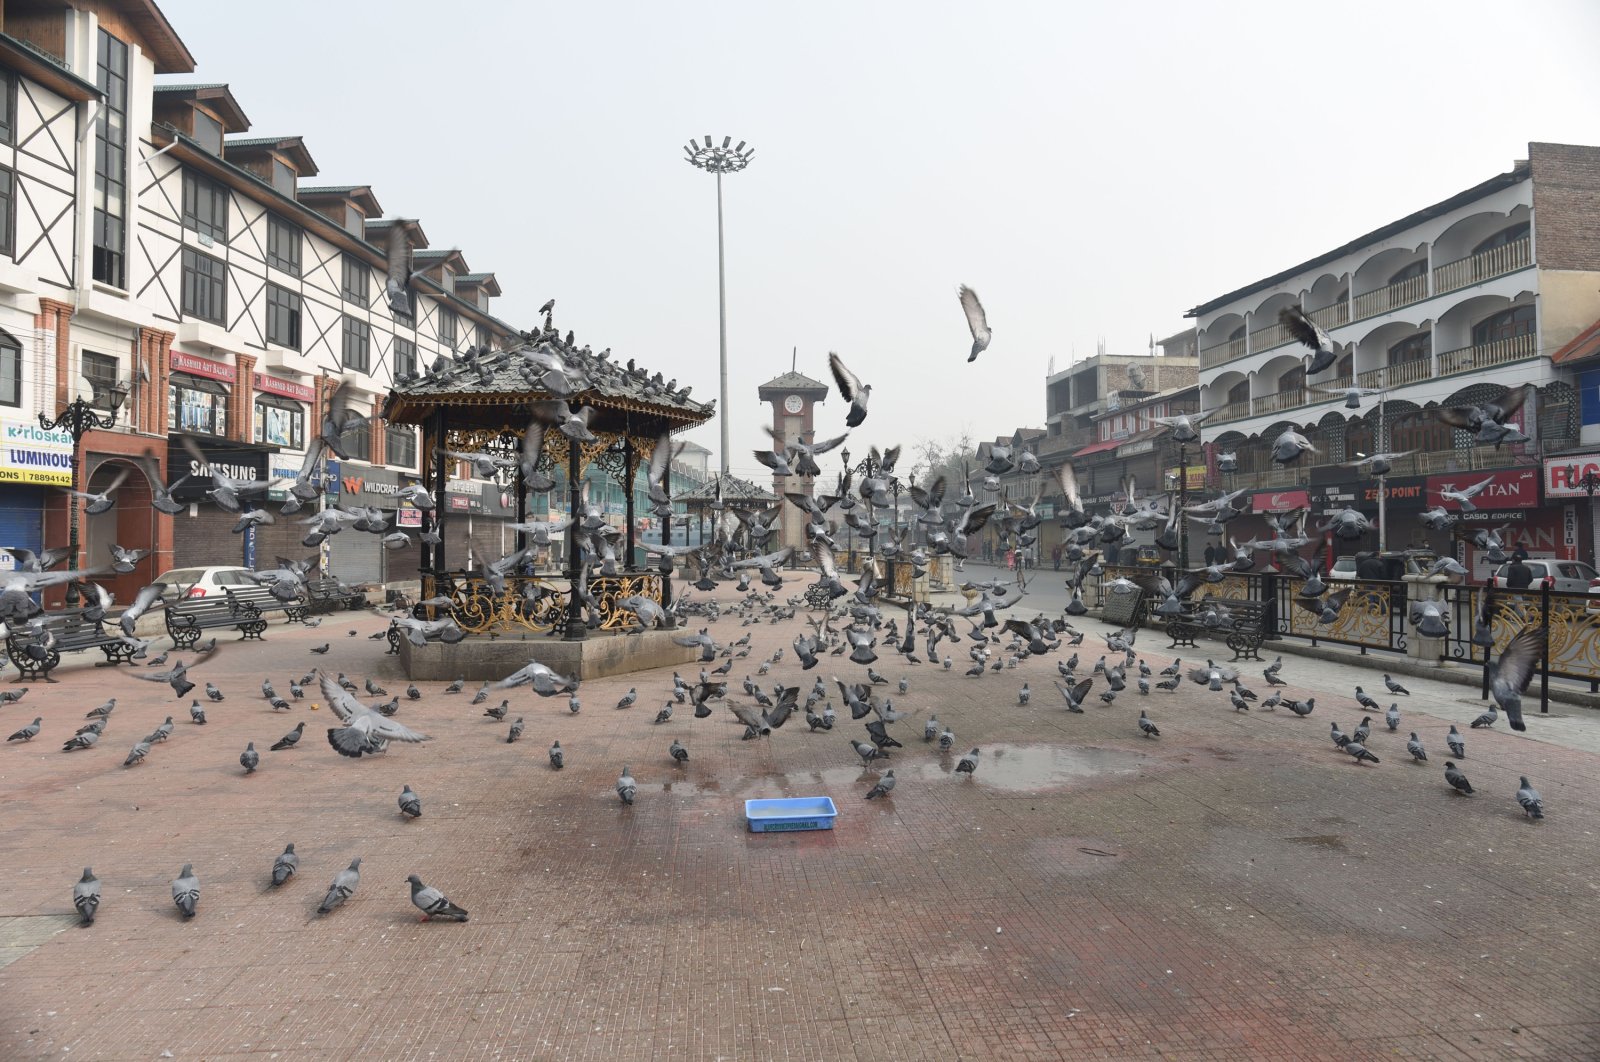 Pigeons seen at a deserted market area in Srinagar, Indian-occupied Kashmir, Nov. 19, 2021. (Photo by Getty Images)